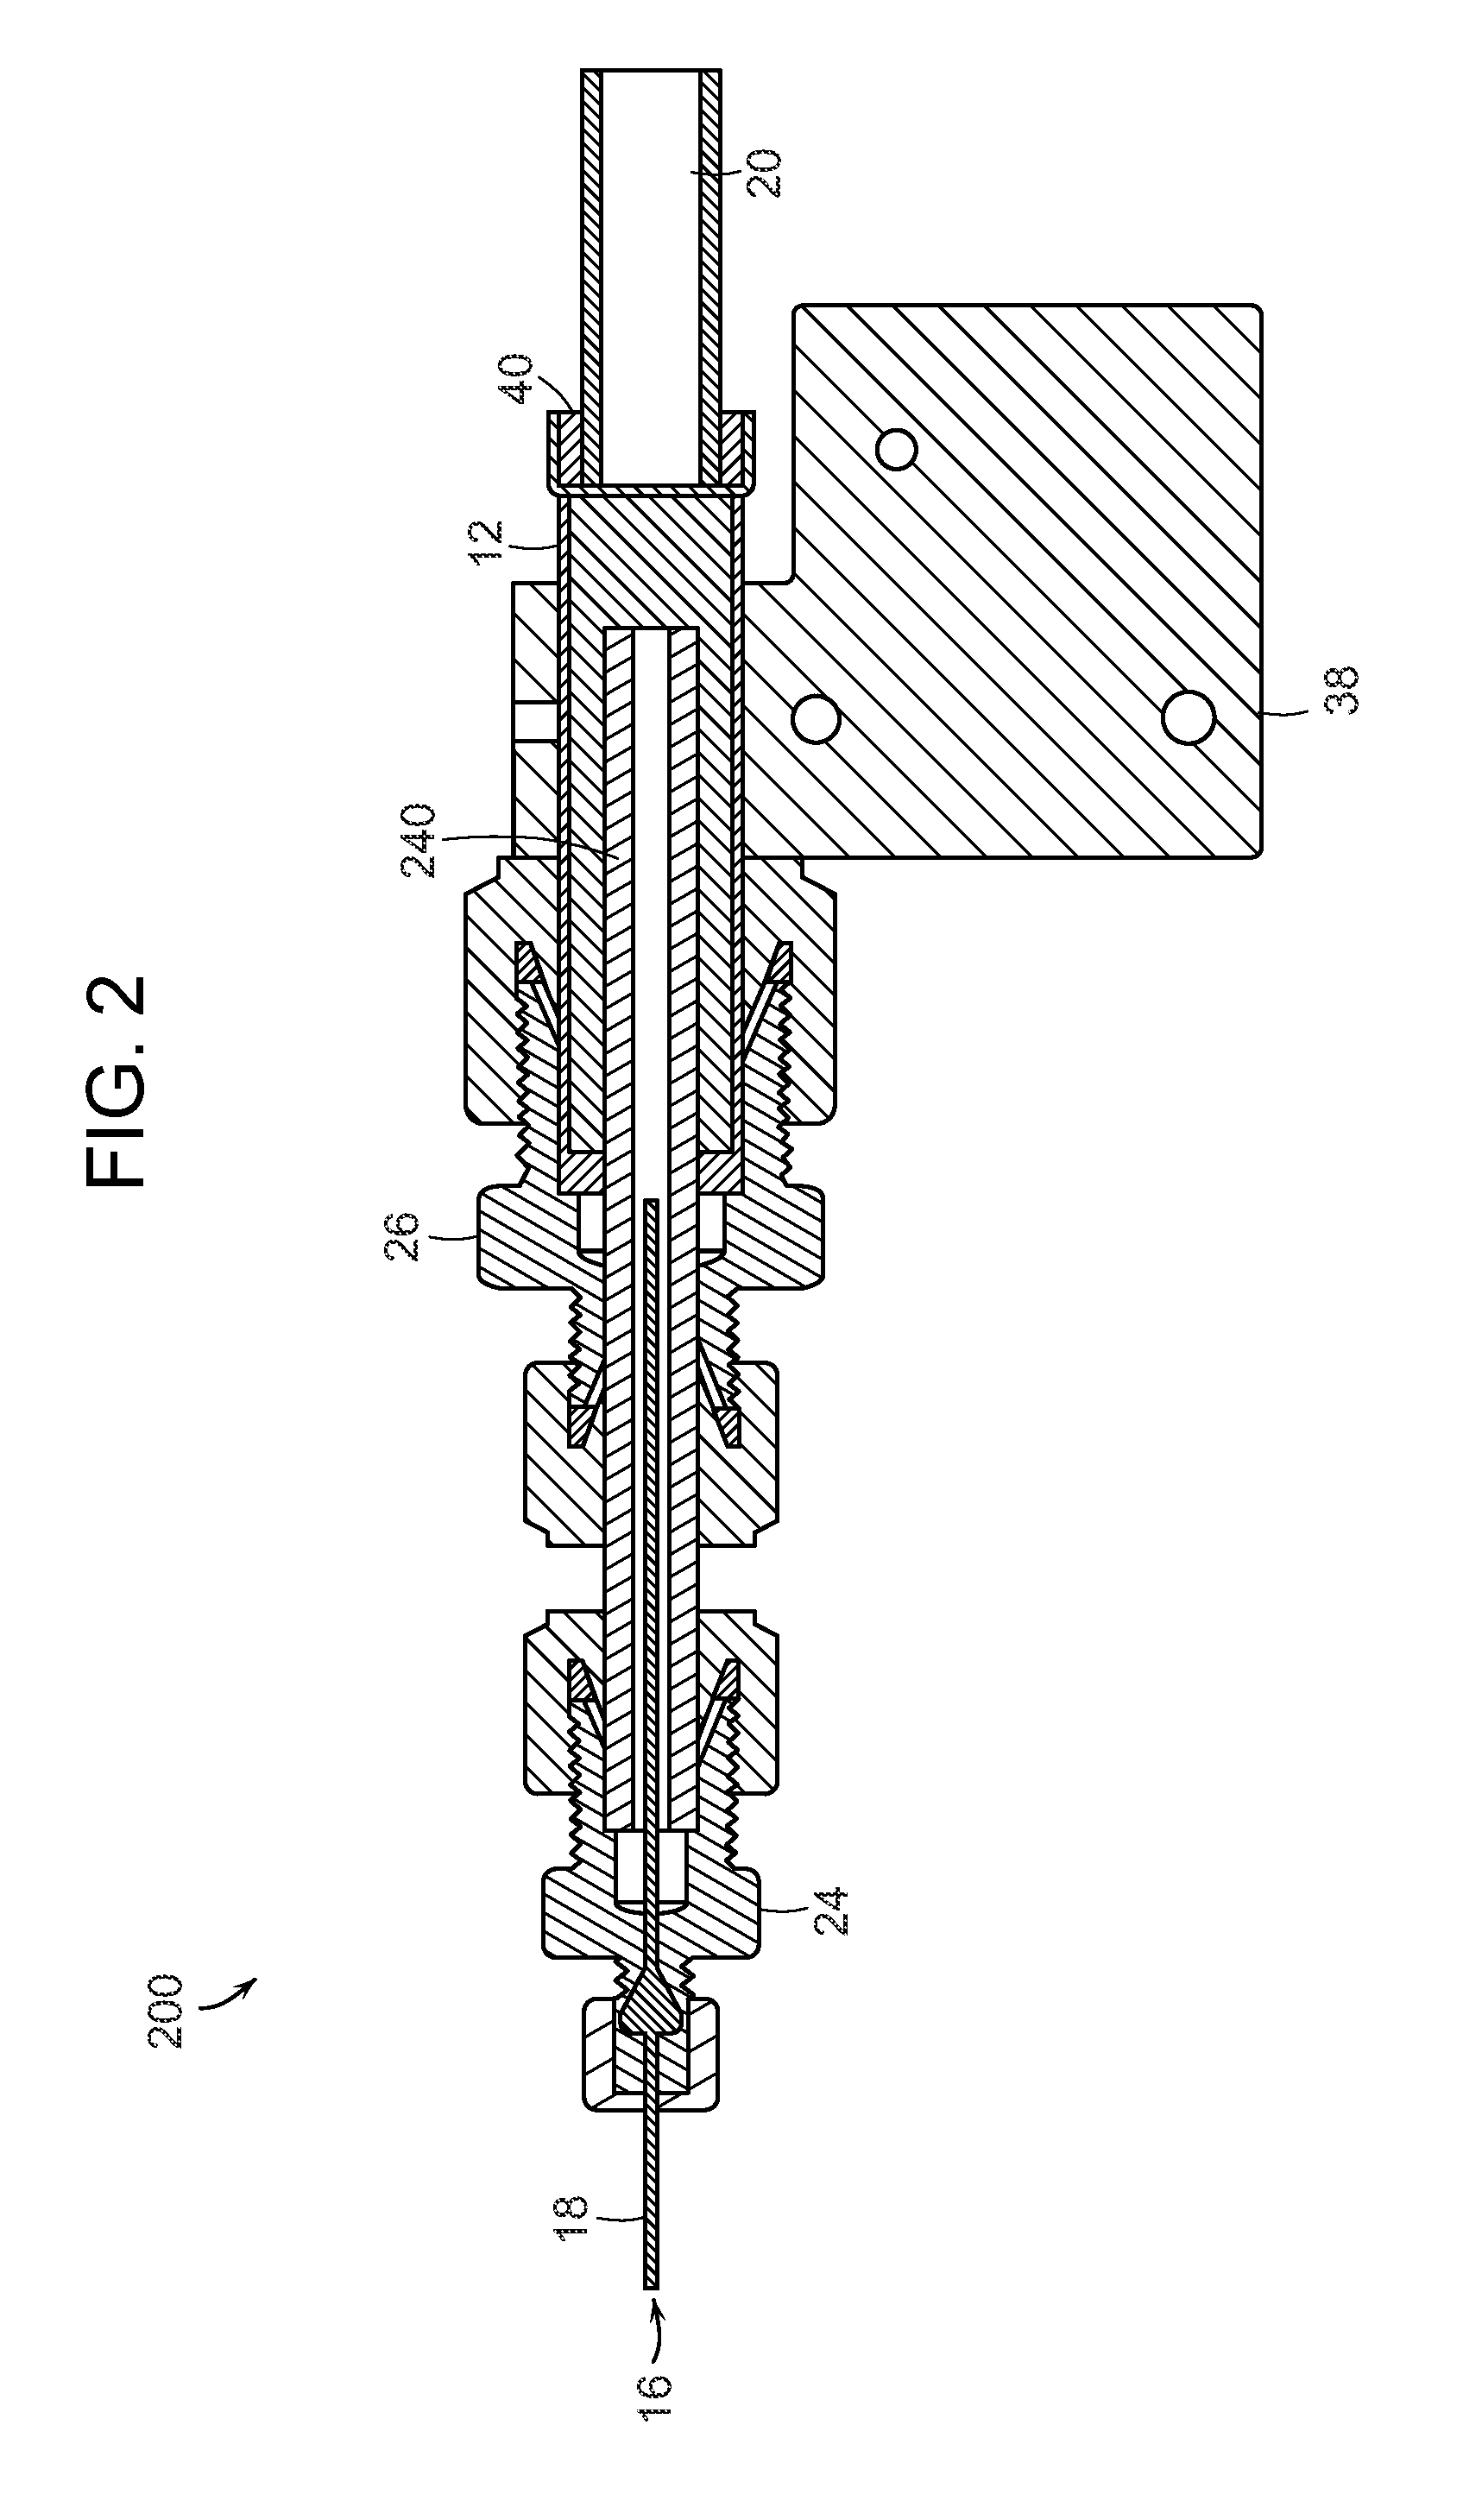 Flame ionization detection for supercritical fluid chromatography employing a matched separation column and flame burner